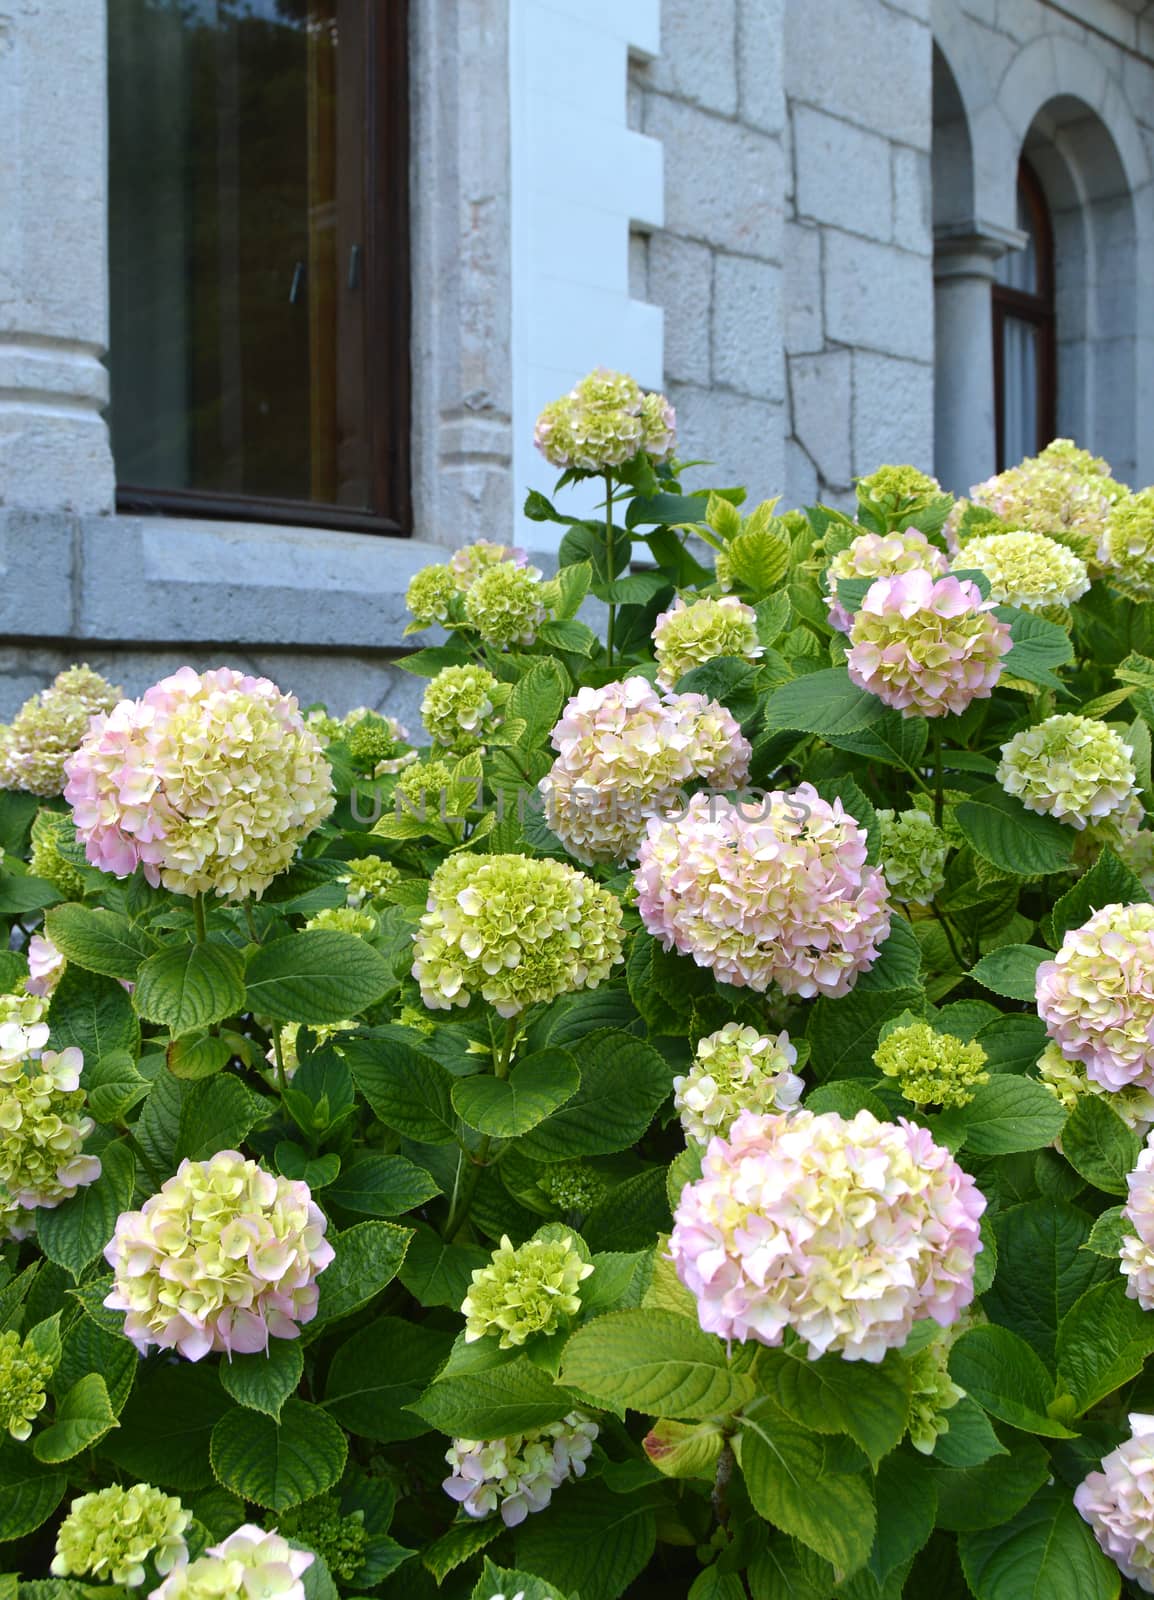 White hydrangea Bush blooms under the arched Windows of an old stone house in a romantic vintage style by claire_lucia